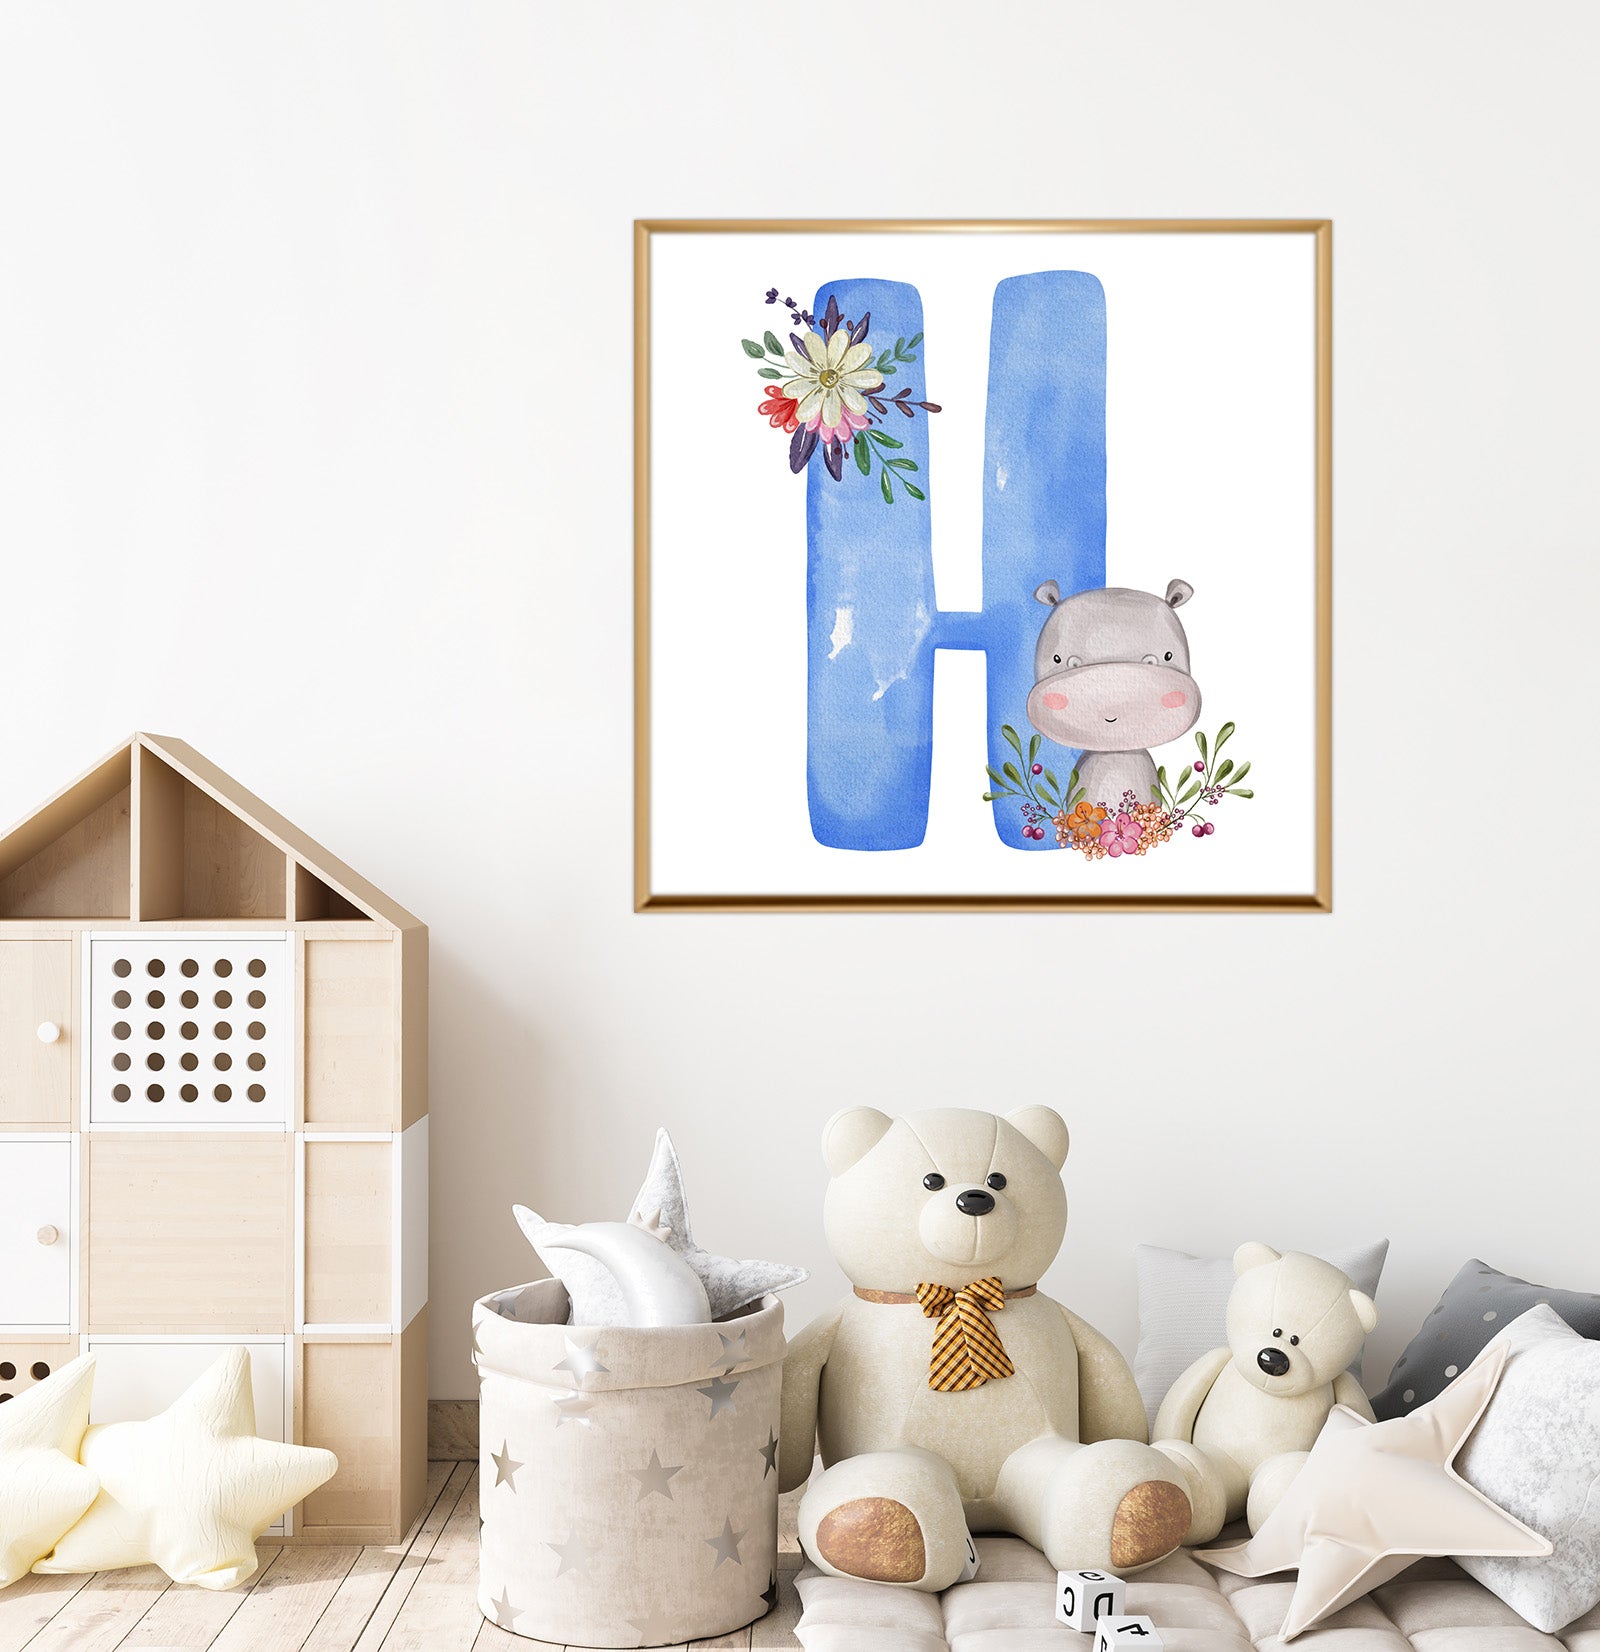 Wall Painting For Kids' Room (Letter H)